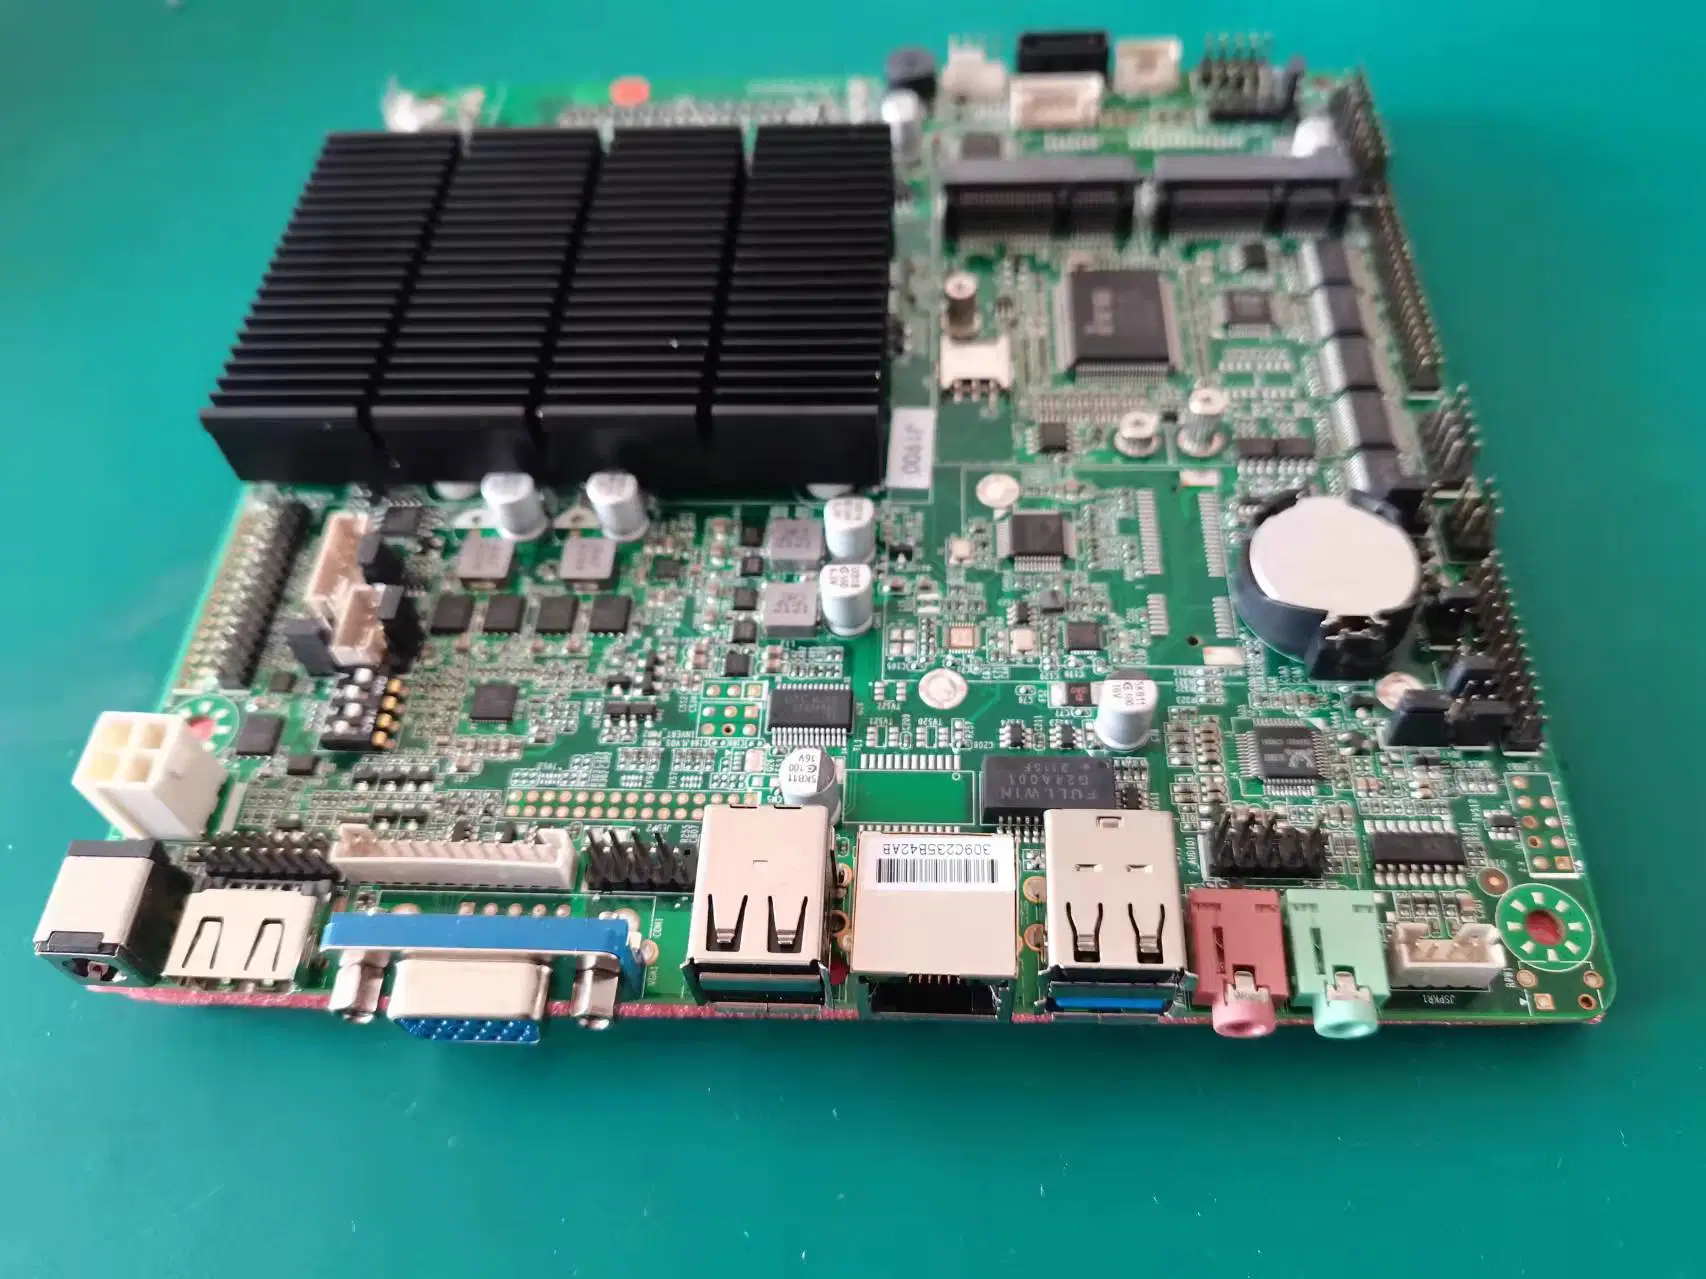 Intel Quad Core J1900 J4125 Thin Client Motherboard Mainboard for Digital Signage